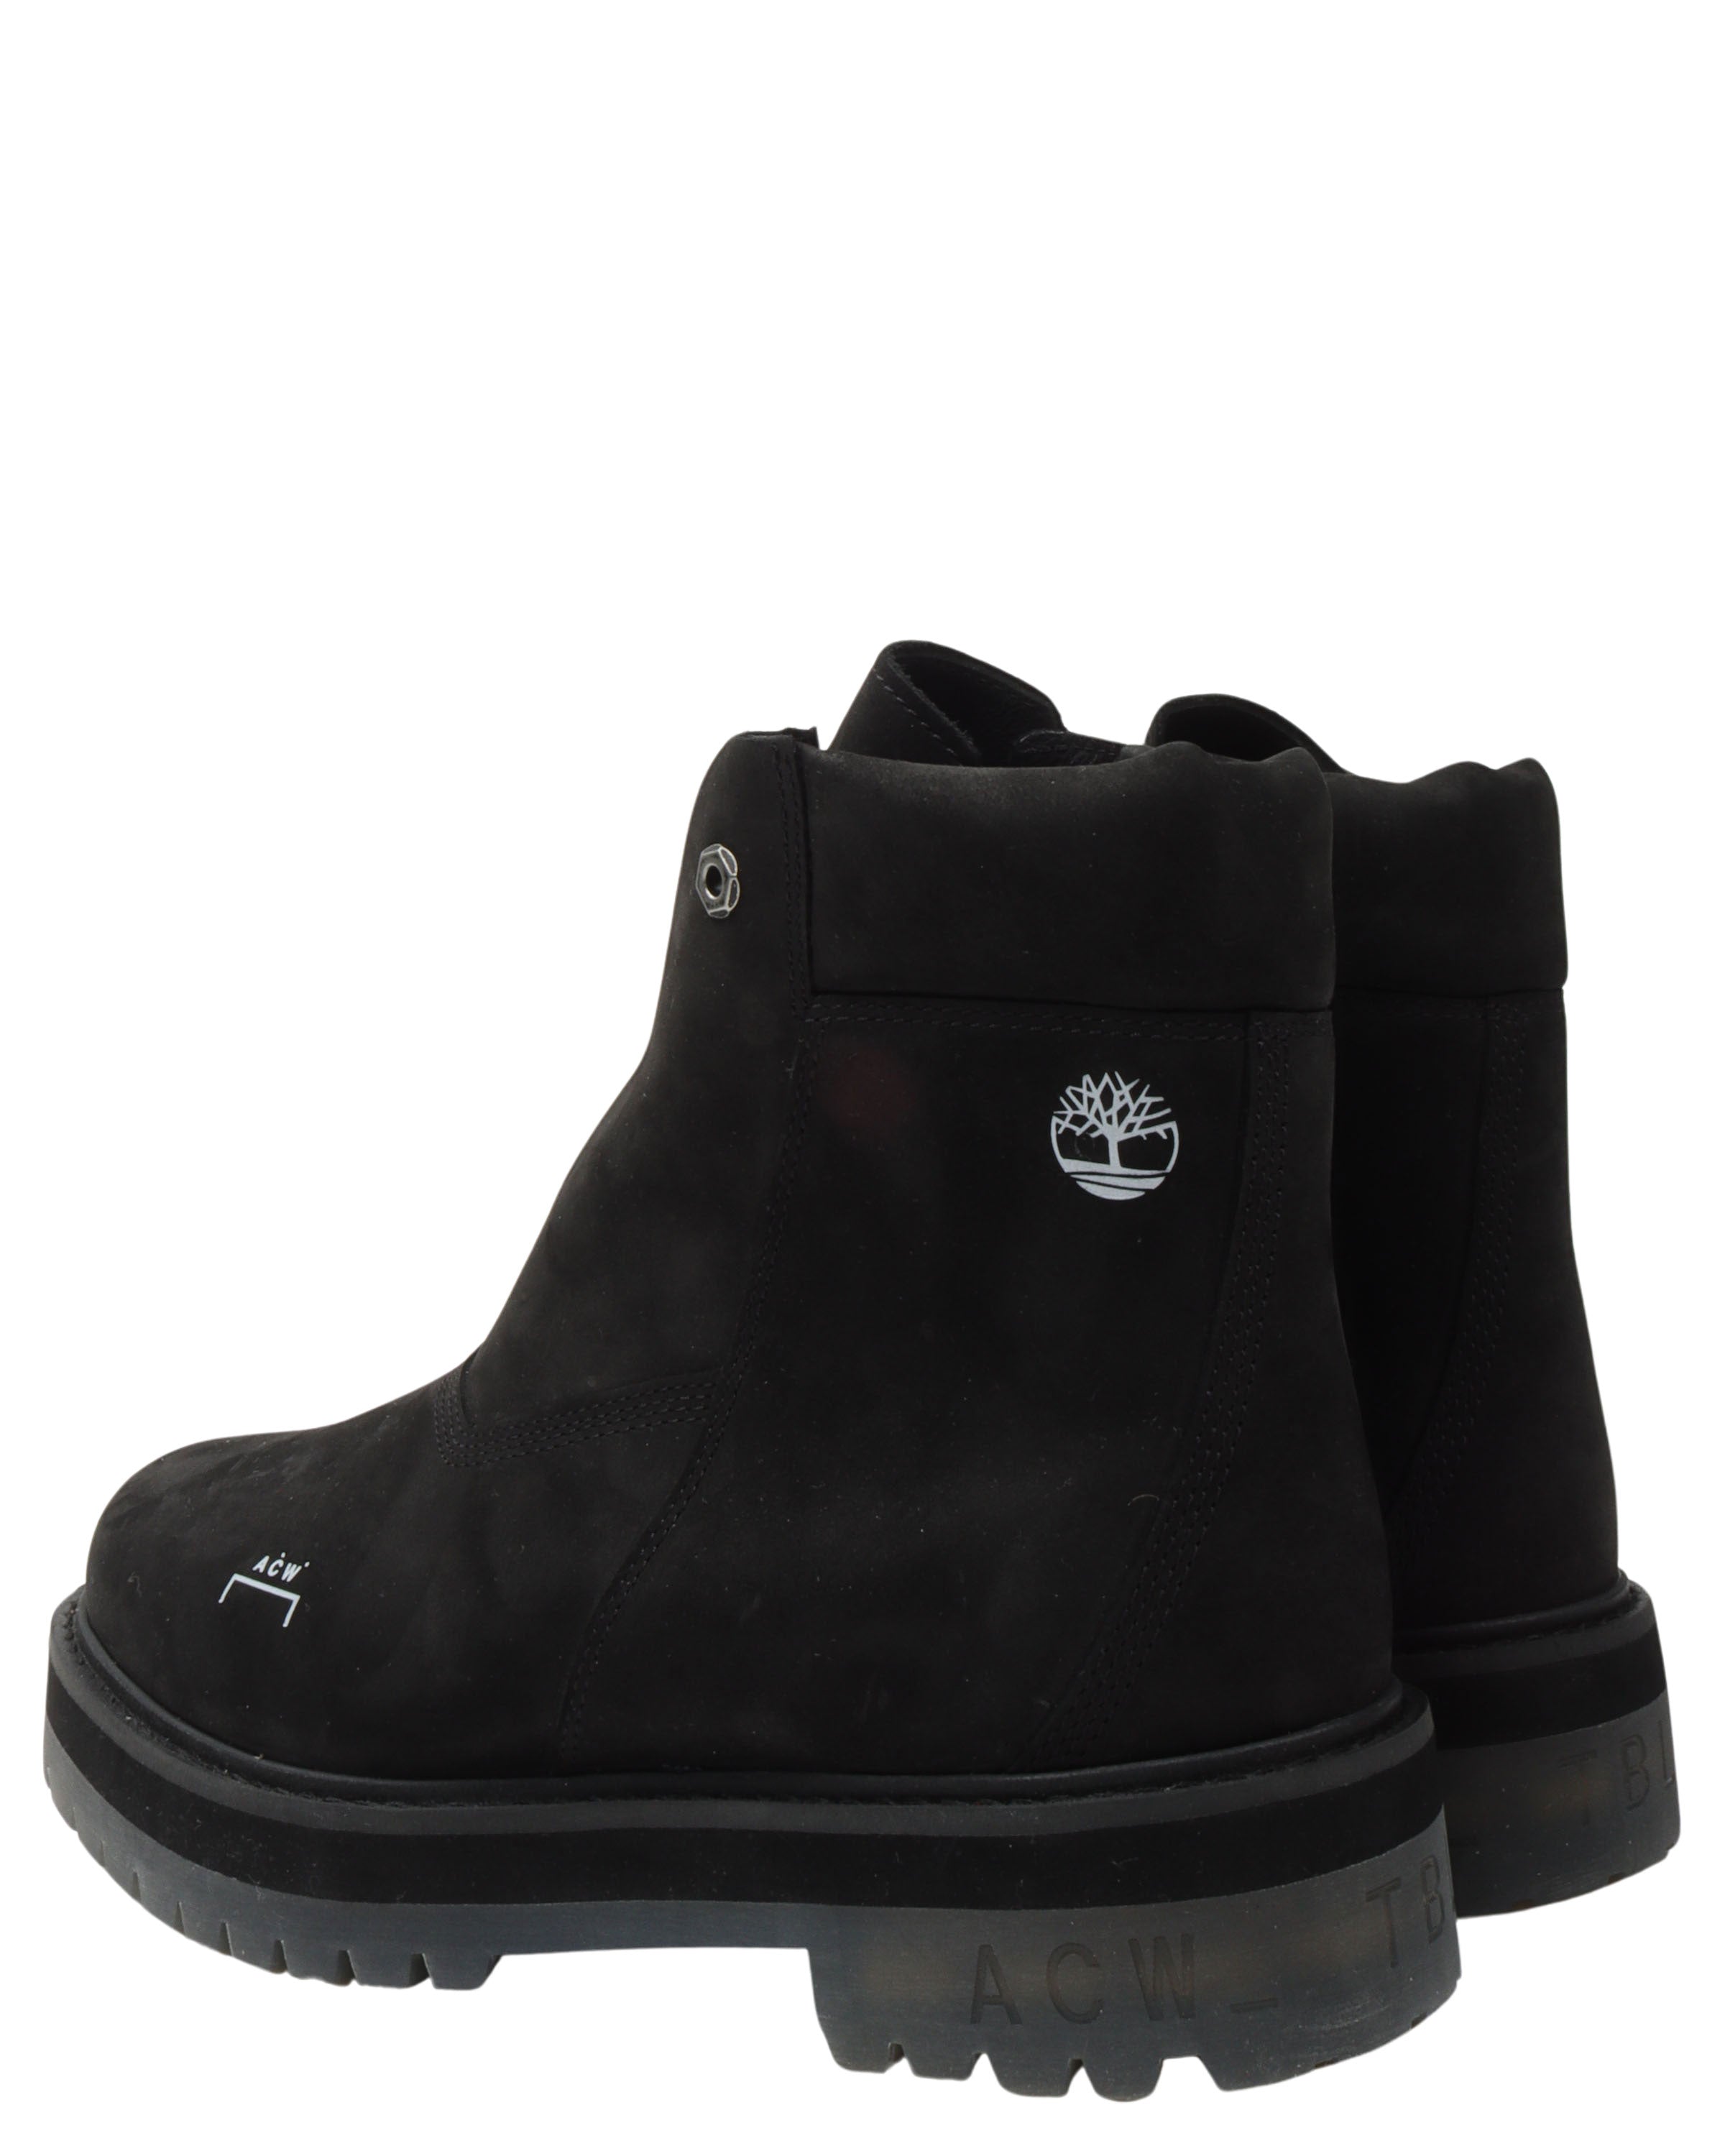 A-COLD-WALL* 6" Nubuck Leather Side Zip Boot